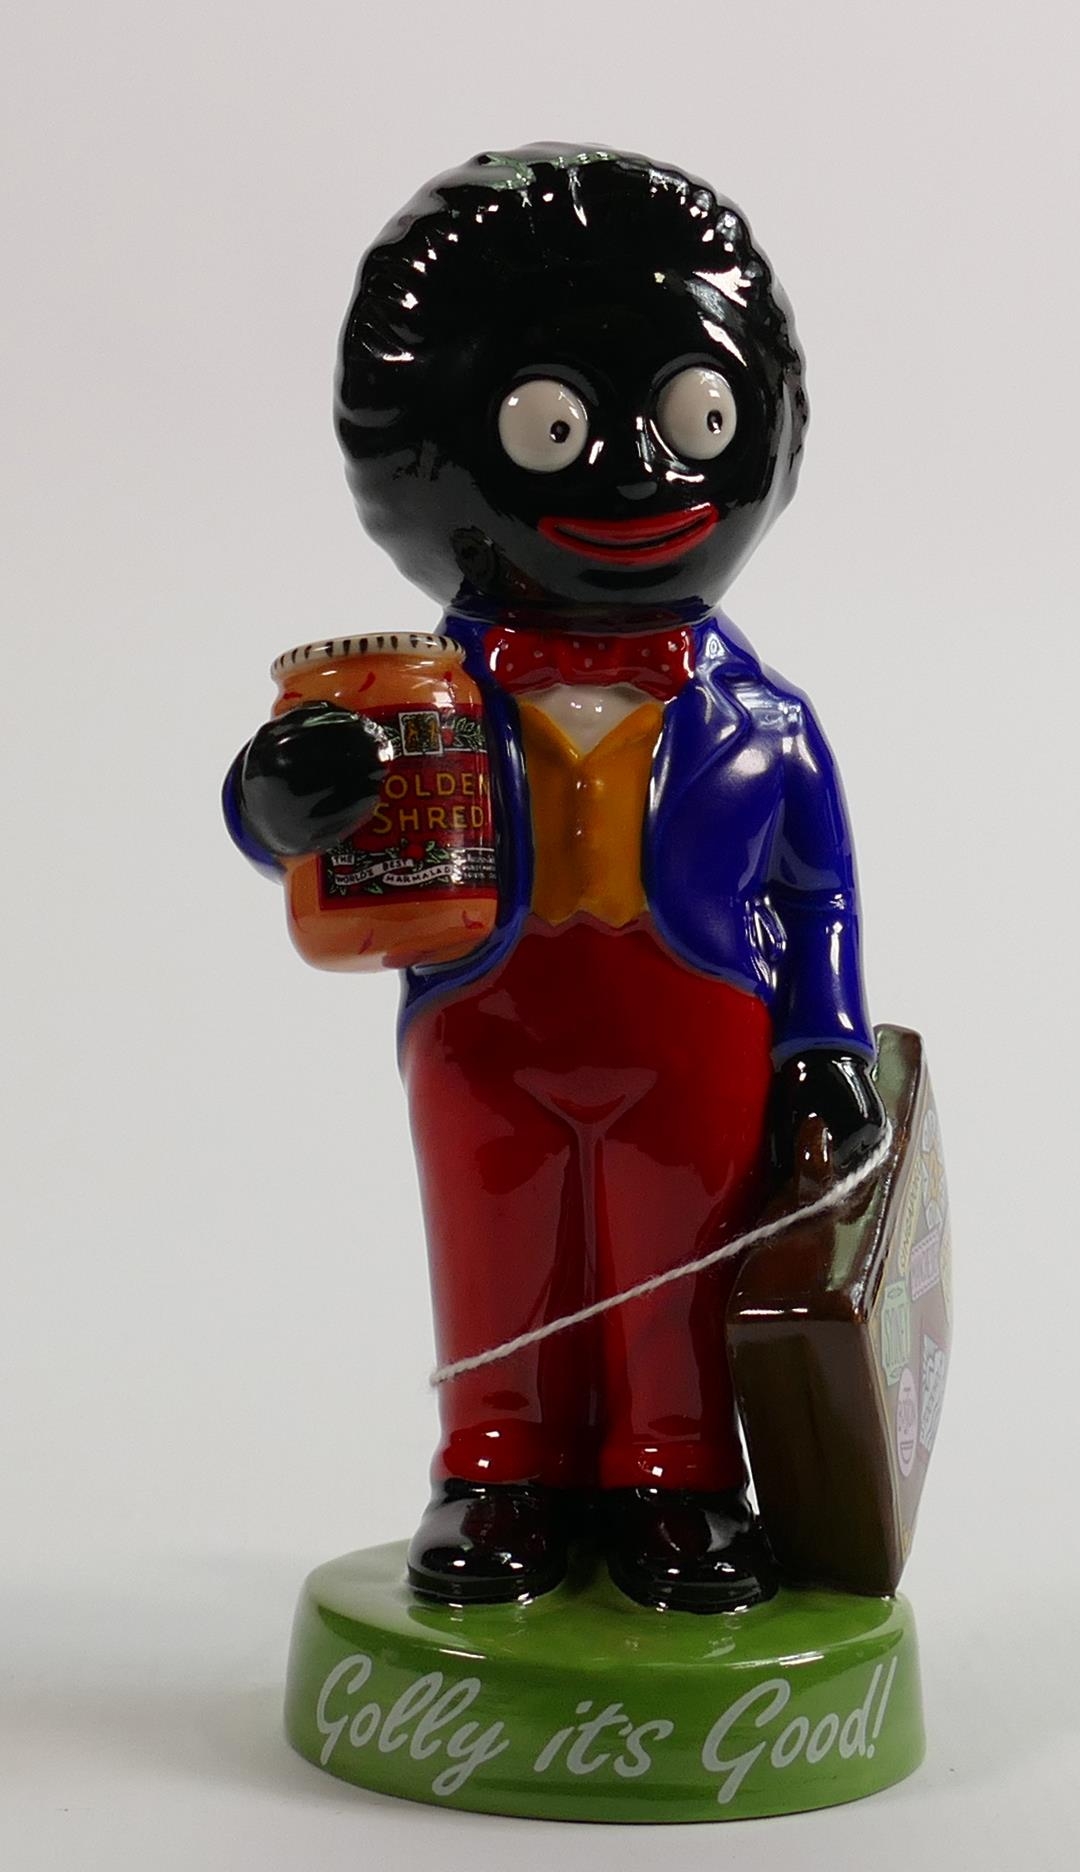 Coalport Limited Edition Advertising Figure Farewell Golly: